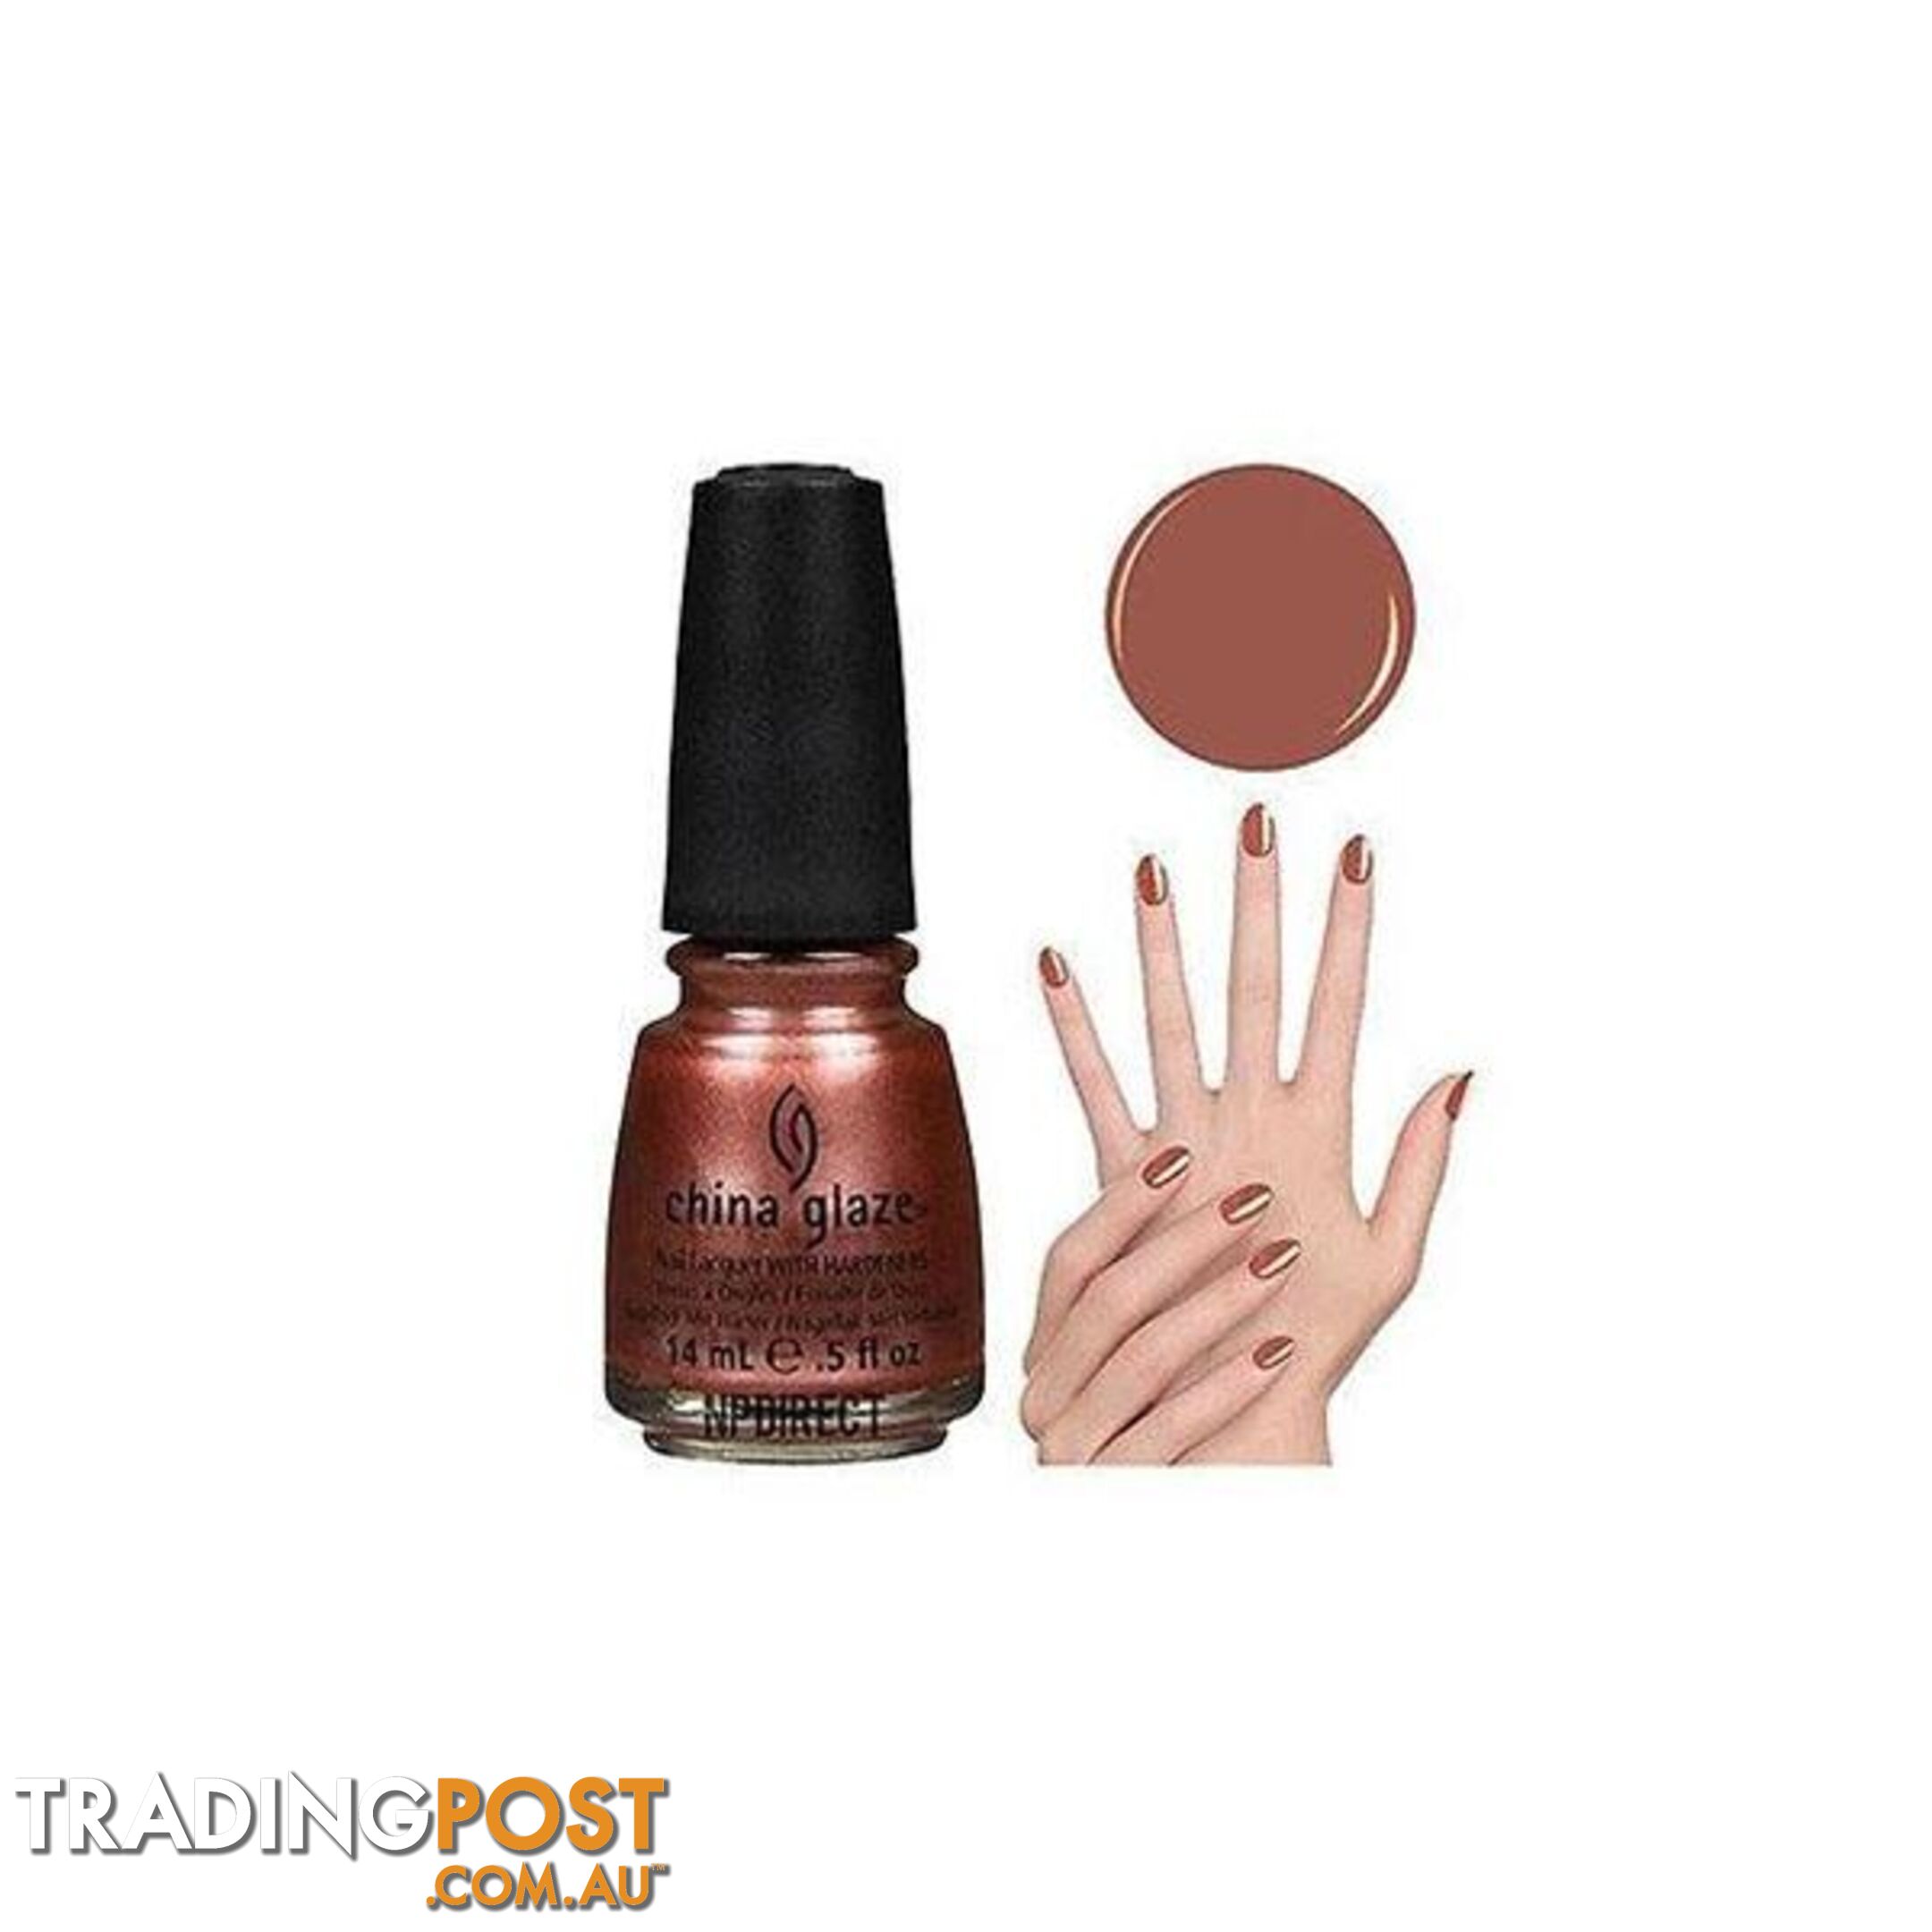 China Glaze Nail Lacquer - Unbranded - 4326500379795